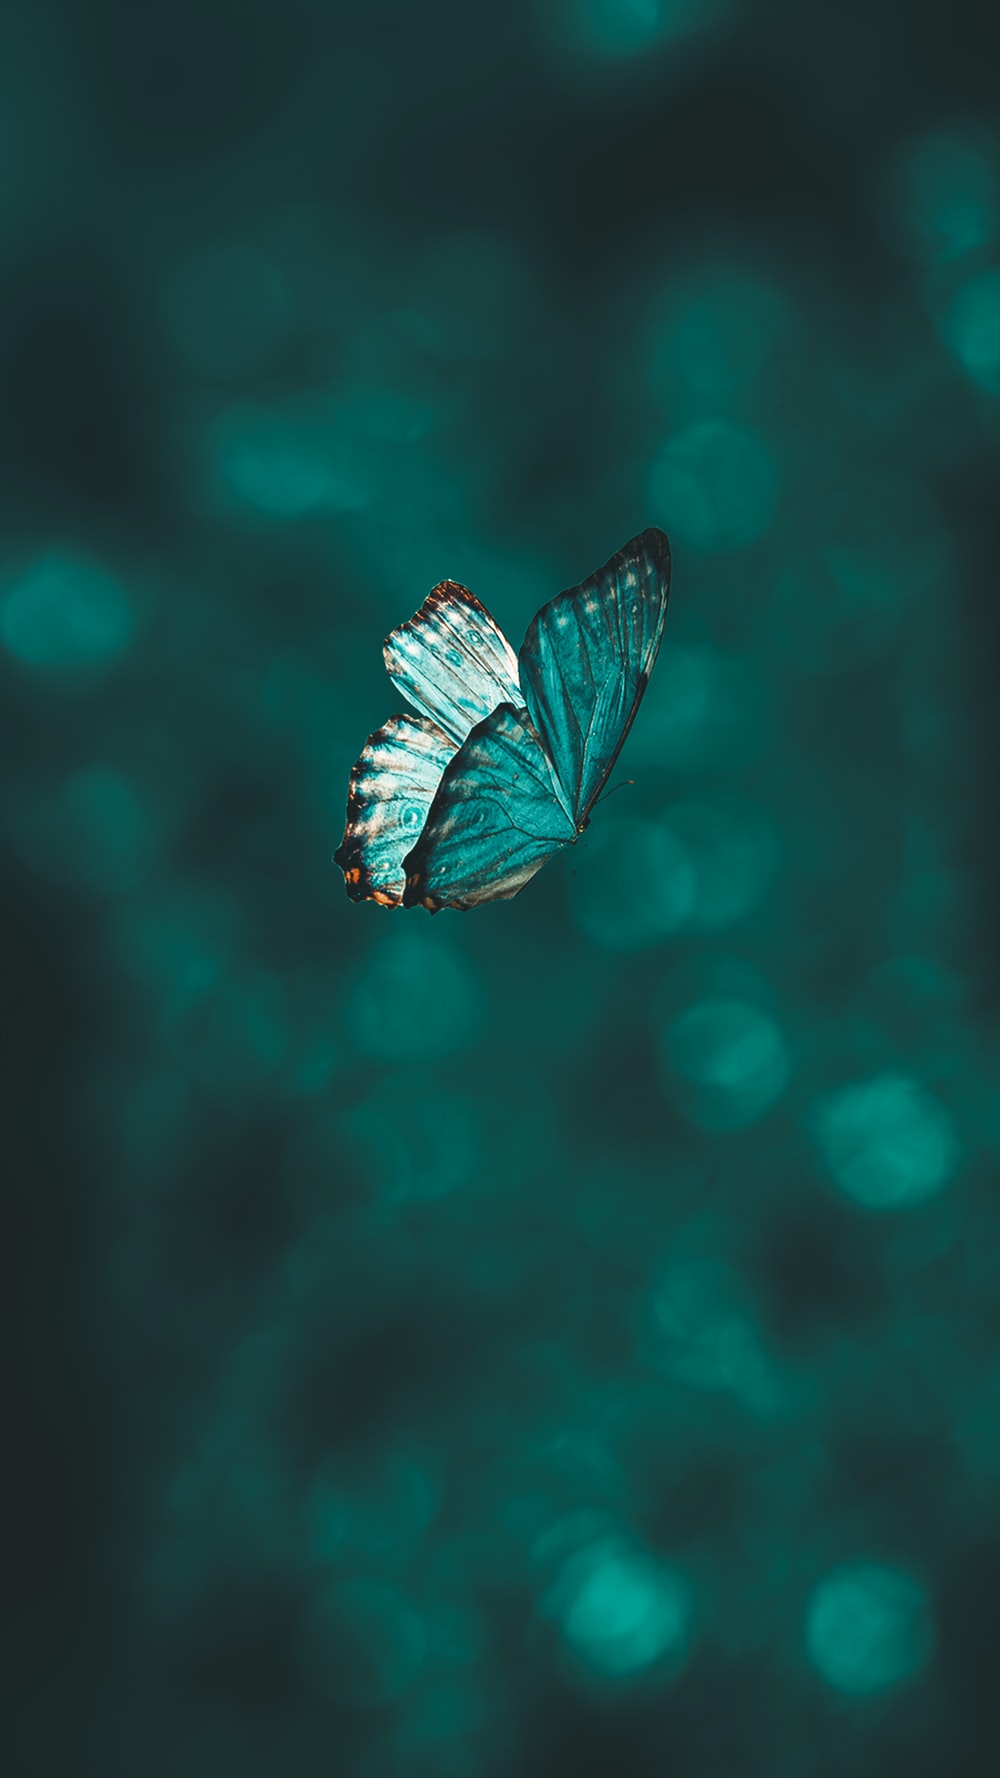 Blue Butterfly Picture. Download Free Image